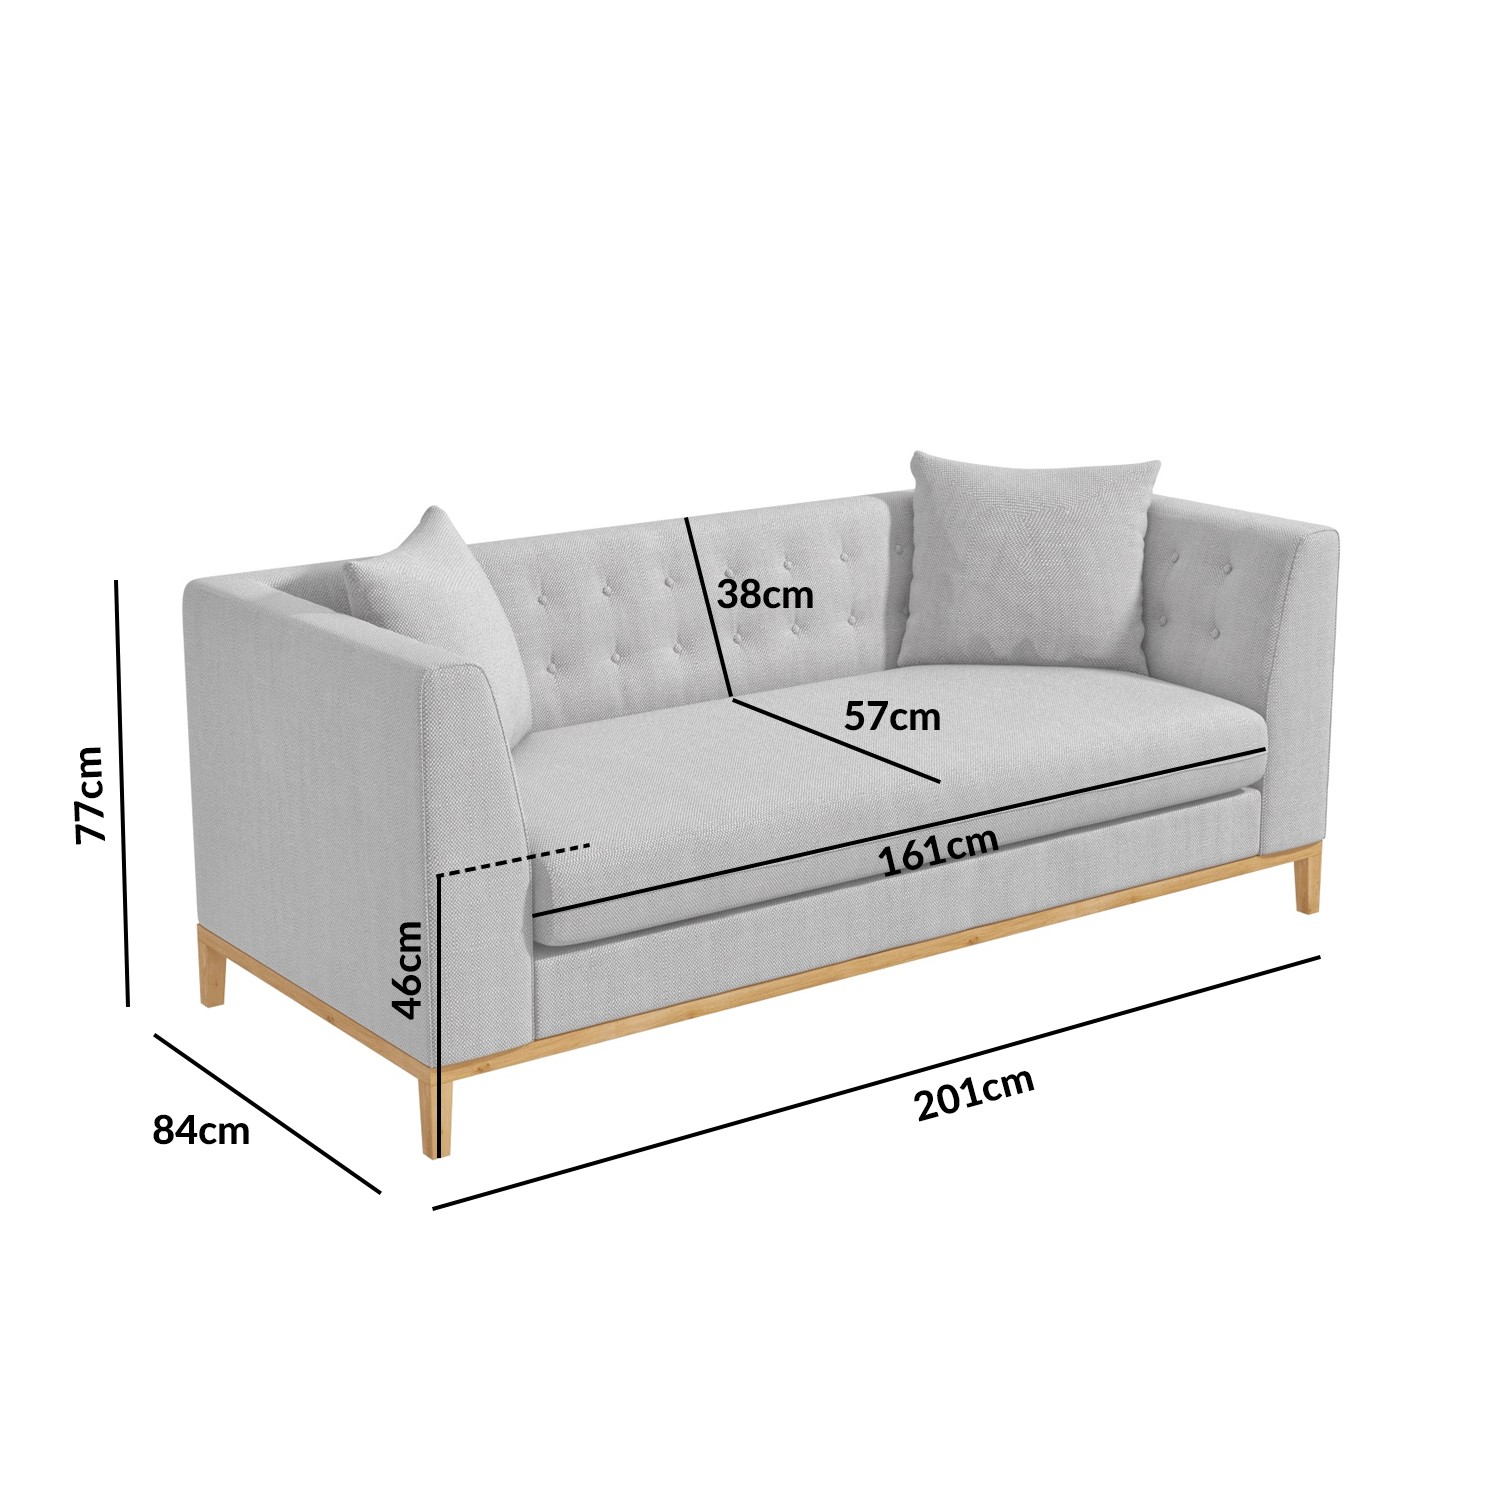 Erin Light Grey Fabric 3 Seater Sofa, How Long Is A 3 Seater Sofa In Feet